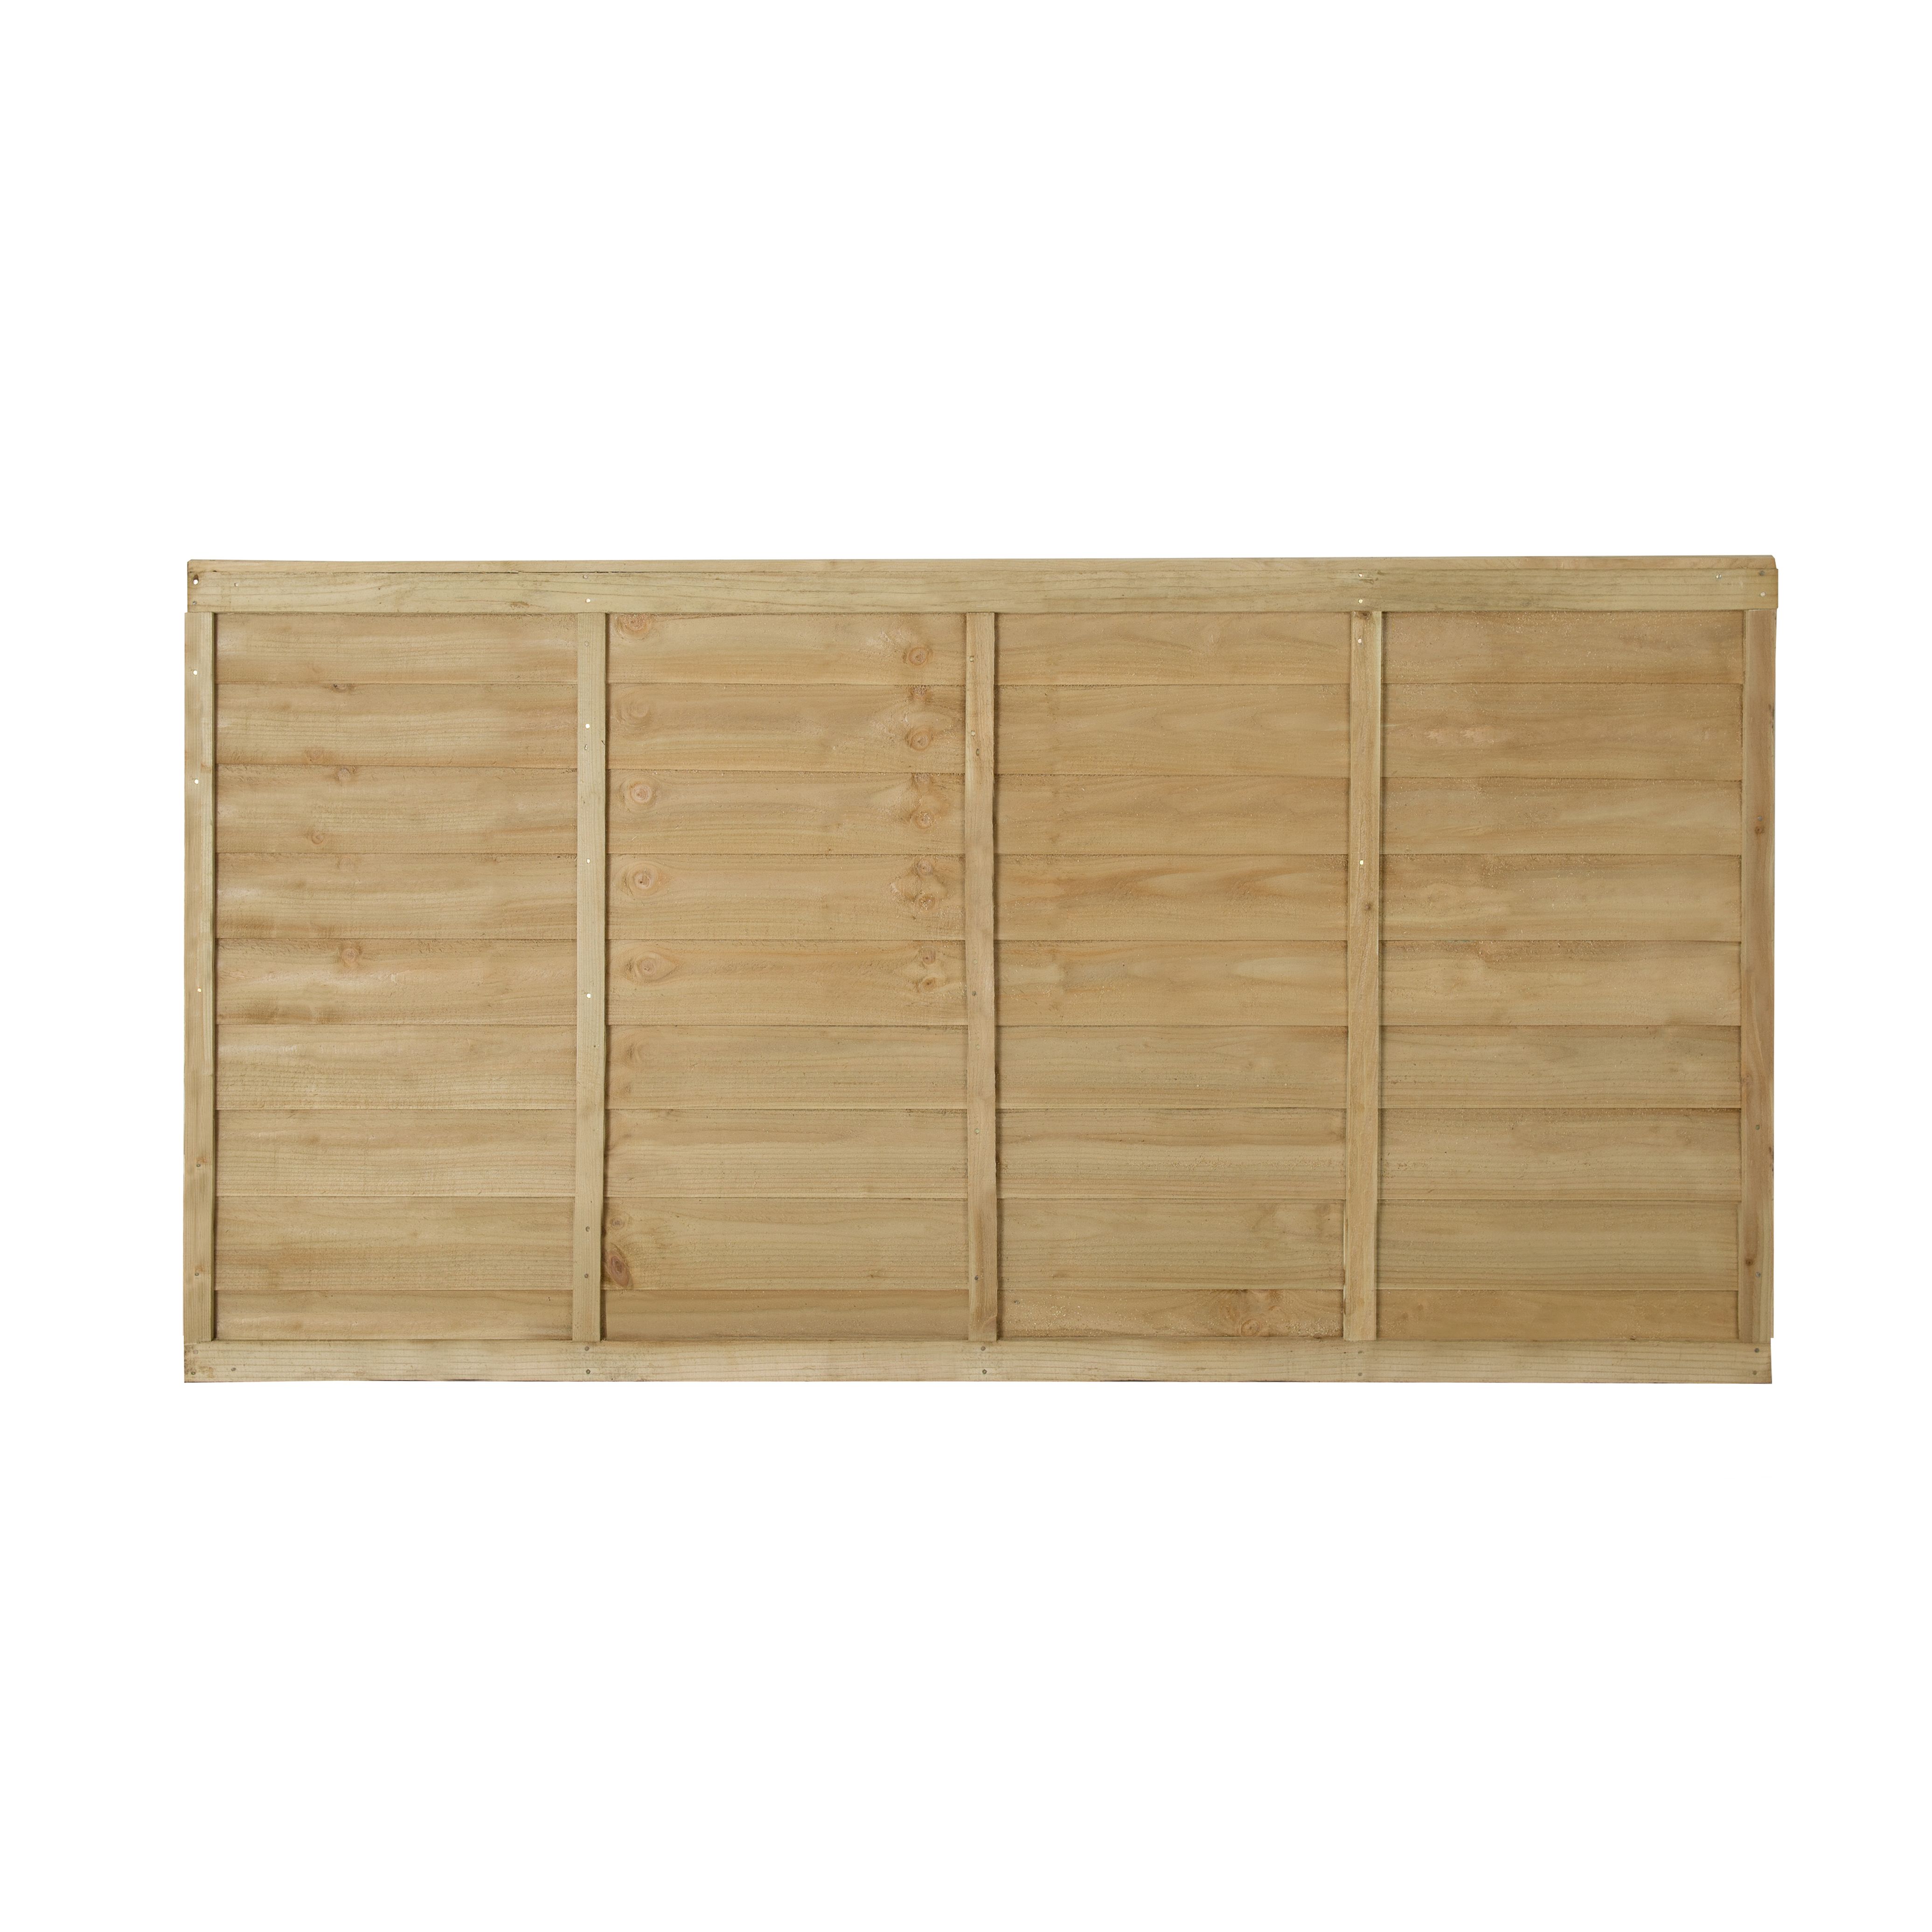 Premier Lap Pressure treated 3ft Wooden Fence panel (W)1.83m (H)0.91m, Pack of 4